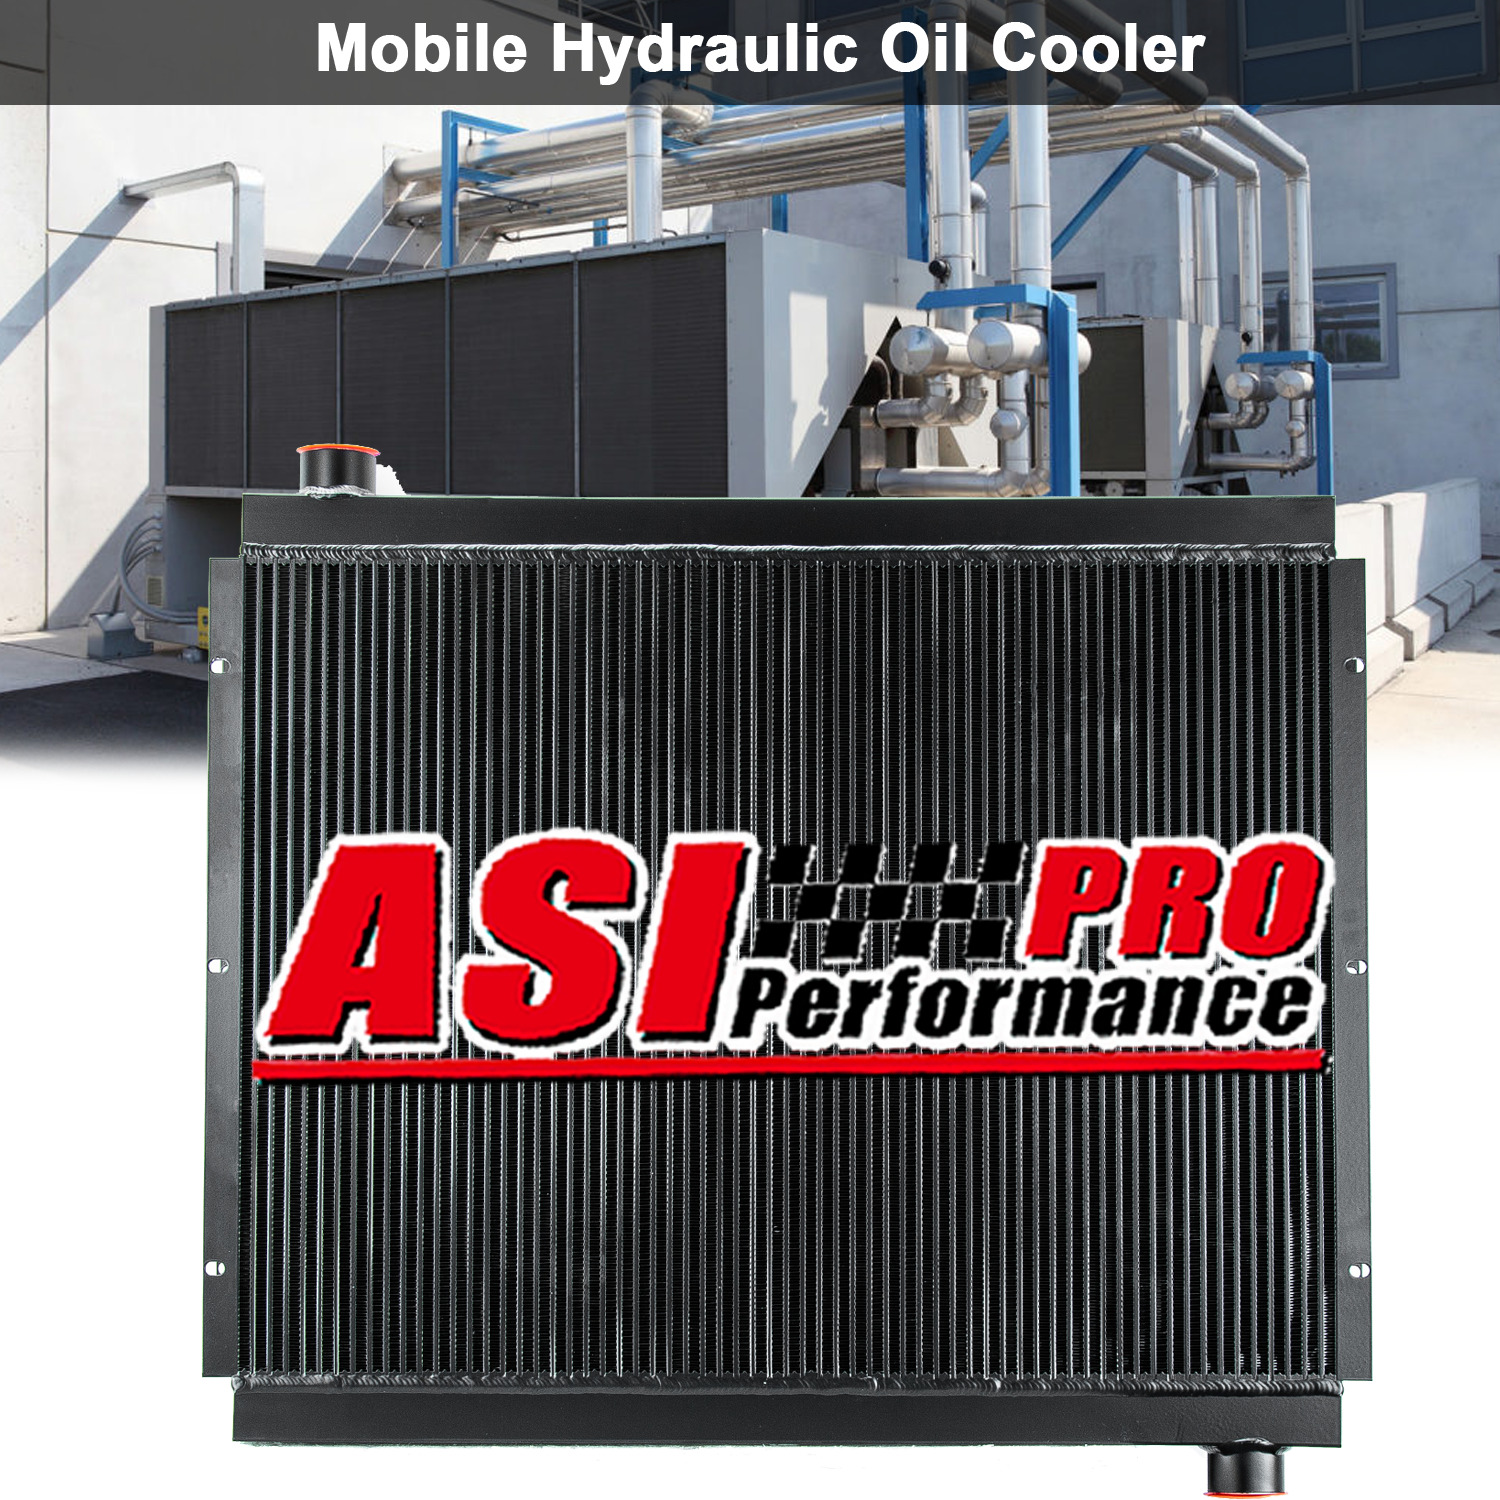 Mobile Hydraulic Oil Cooler fits Heavy Duty Industrial Hydraulic  System